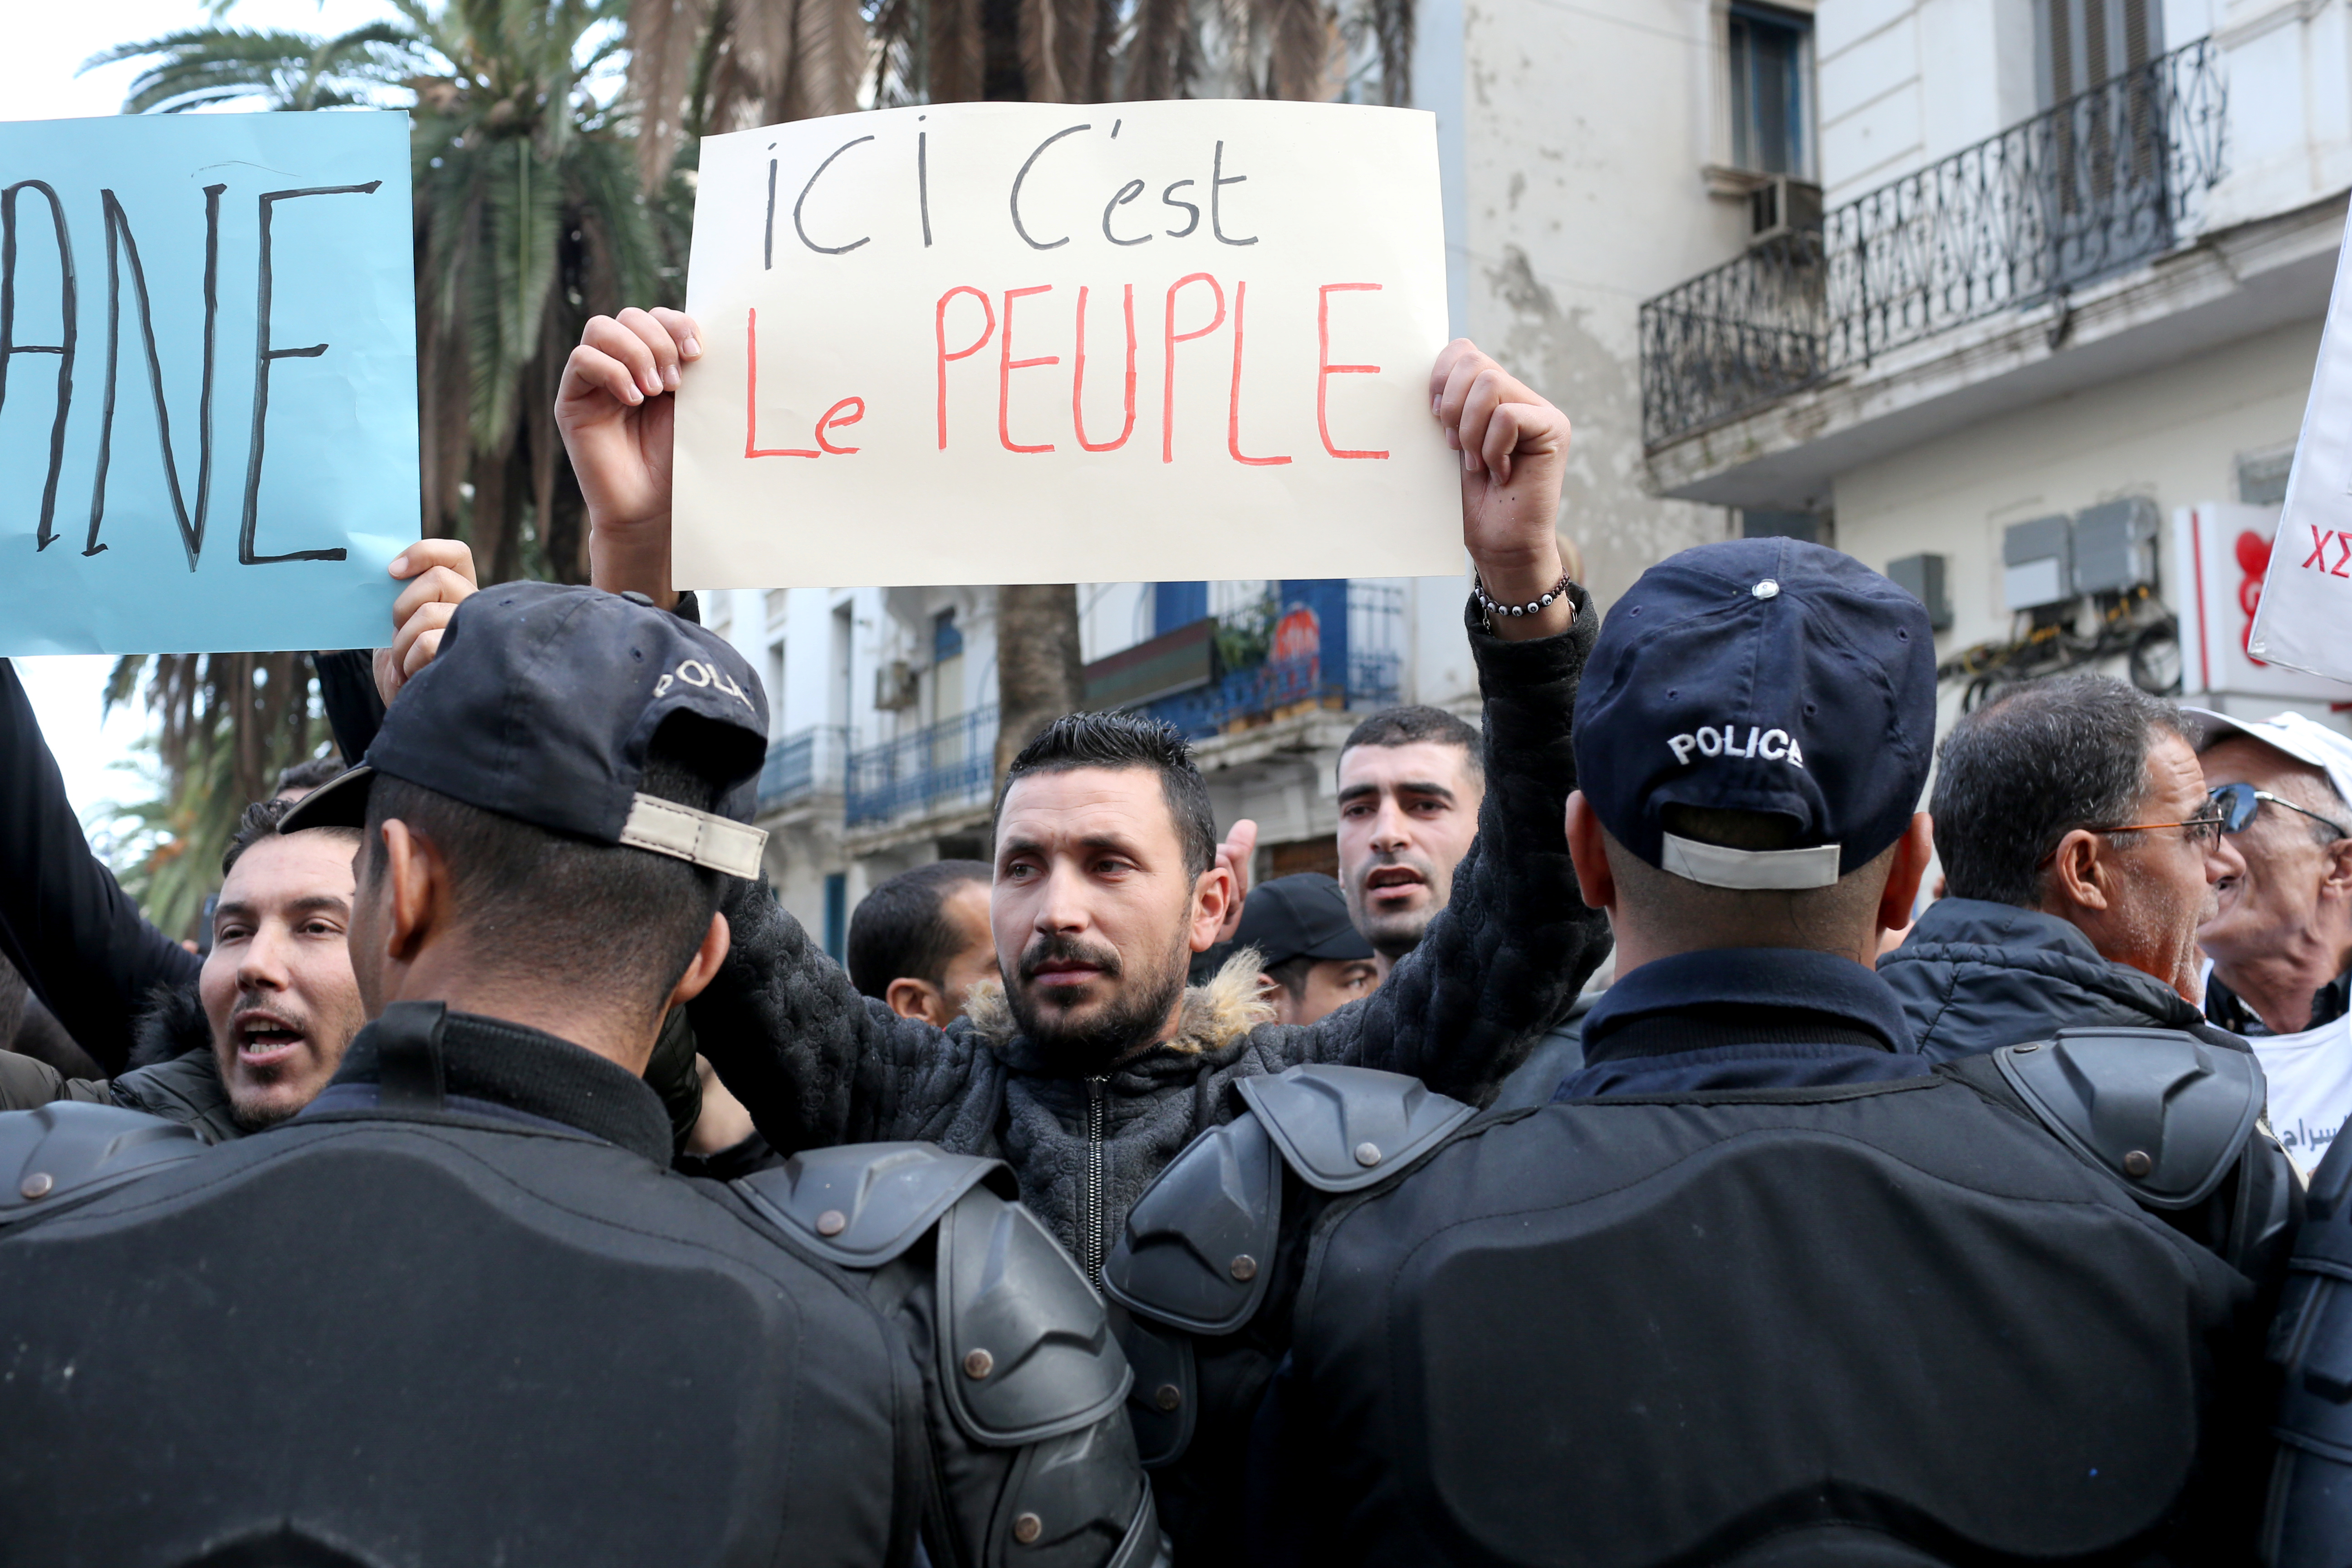 A demonstrator holds a placard during an anti-government rally in Algiers, Algeria December 27, 2019. REUTERS/Ramzi Boudina